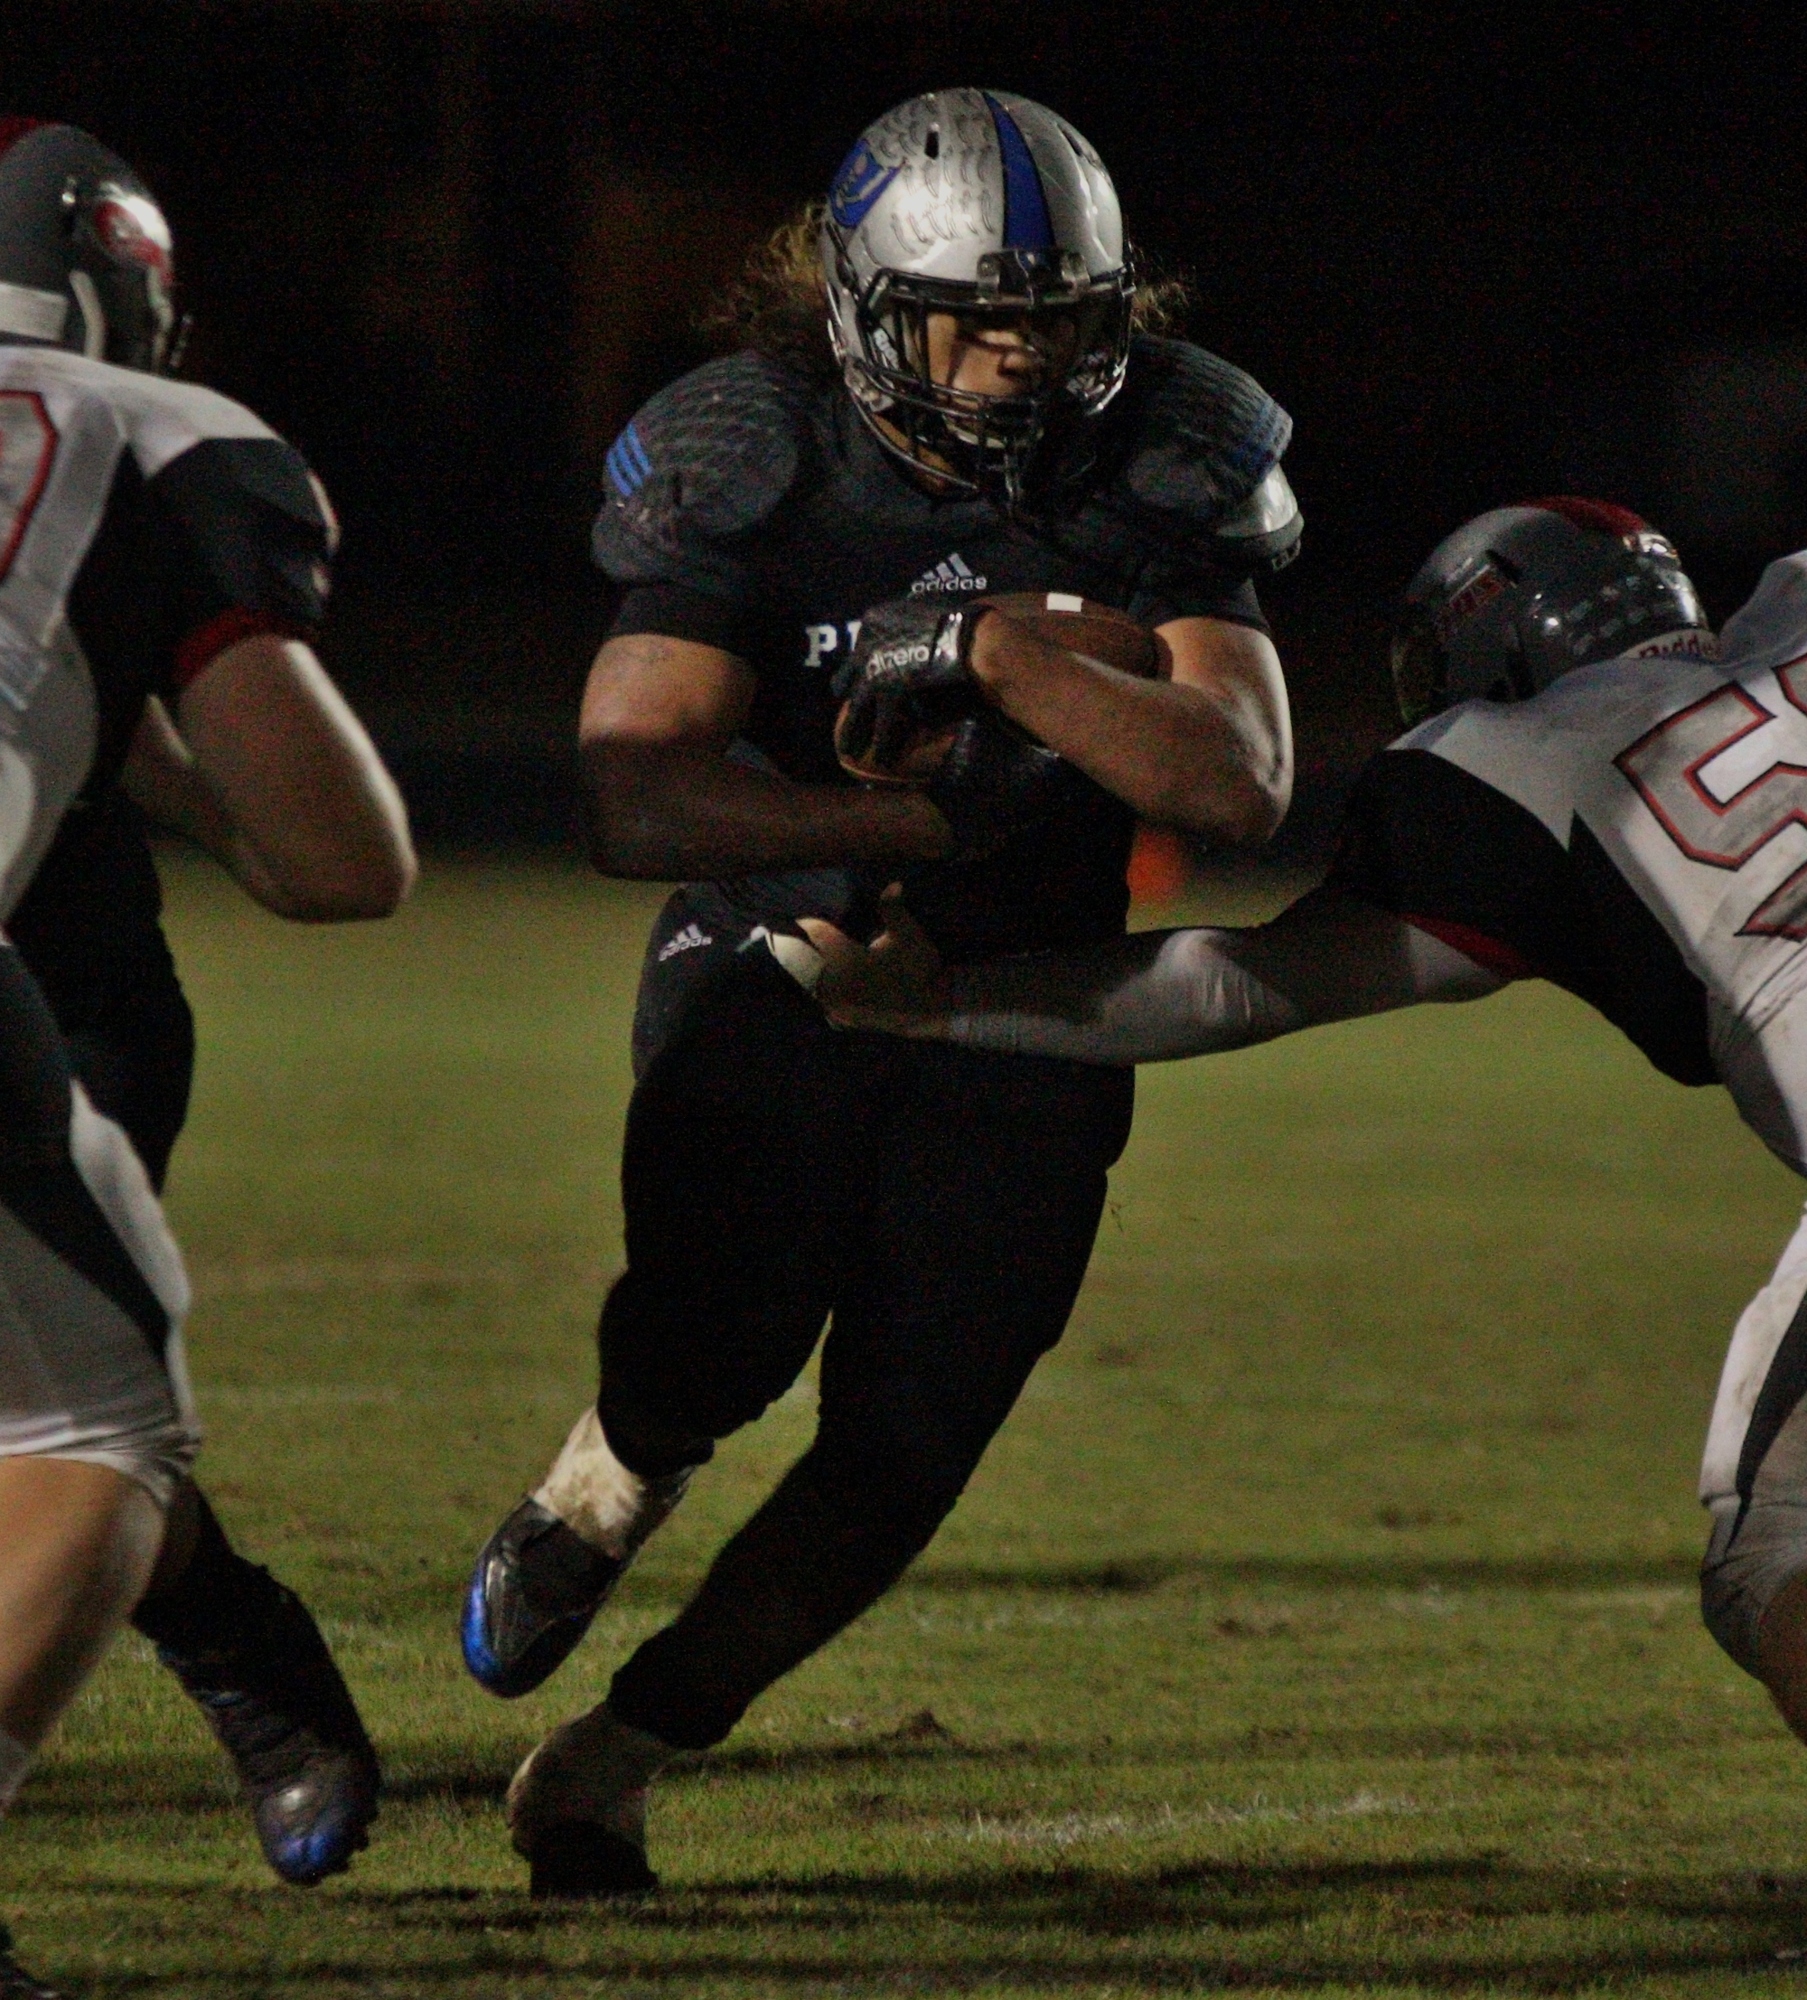 Daniel Dillard has been the best offensive weapon for the Matanzas Pirates this year.